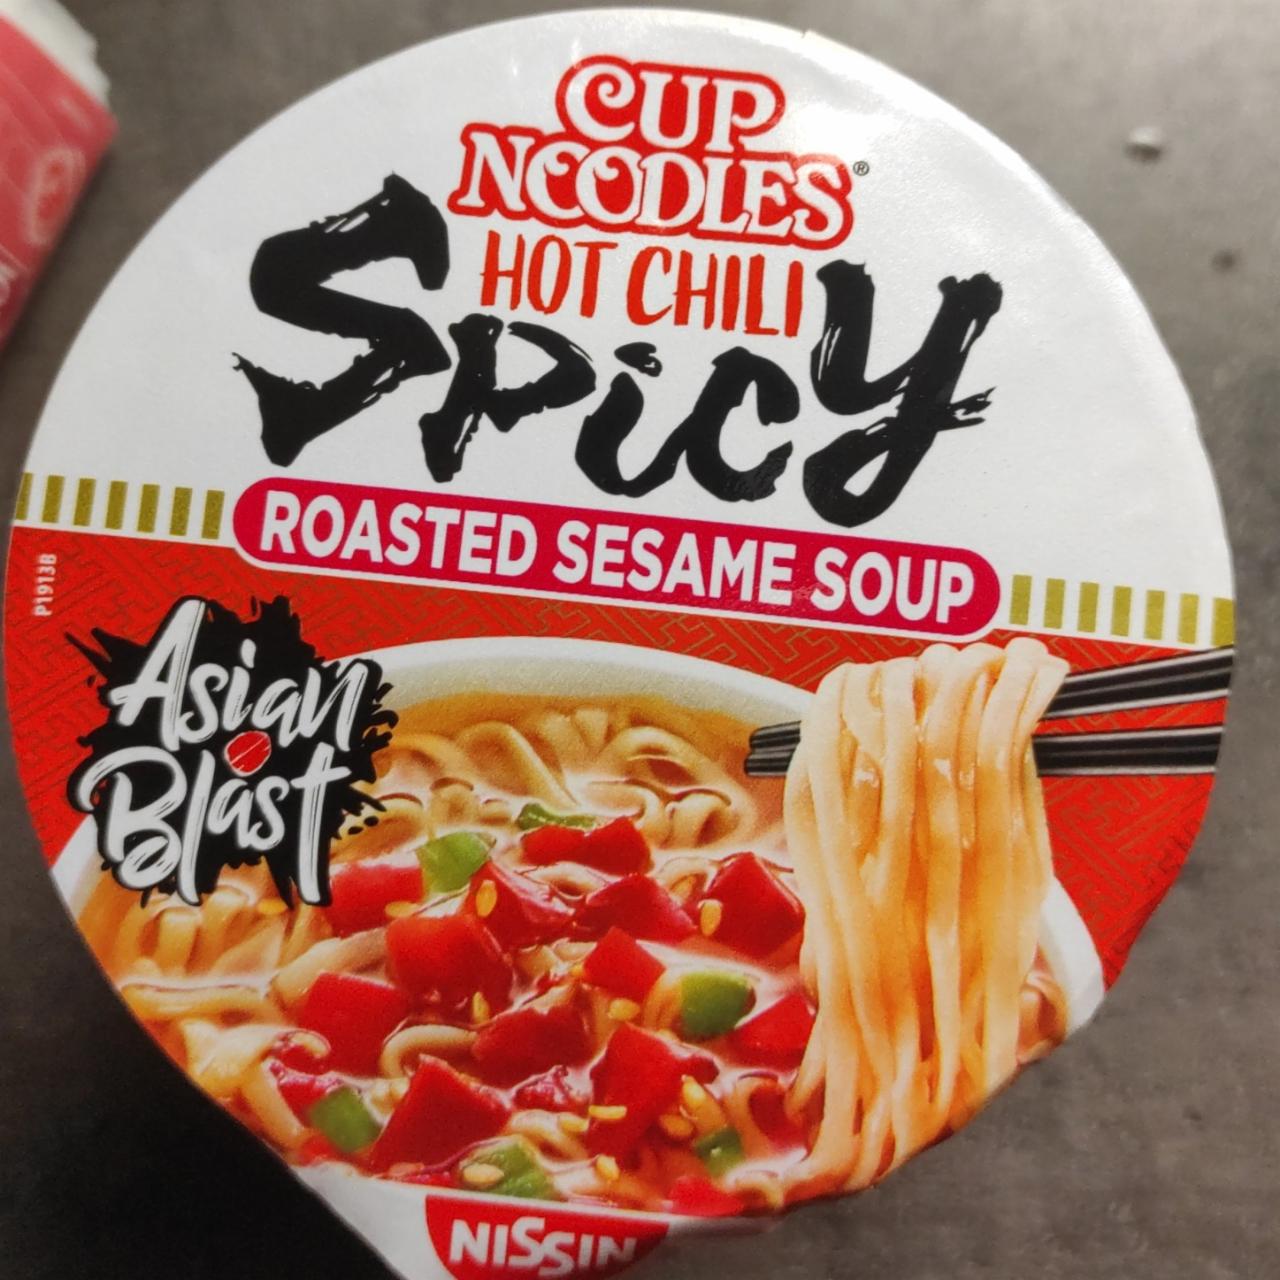 Fotografie - Cup Noodles Hot Chili Spicy Roasted Sesame Soup Nissin